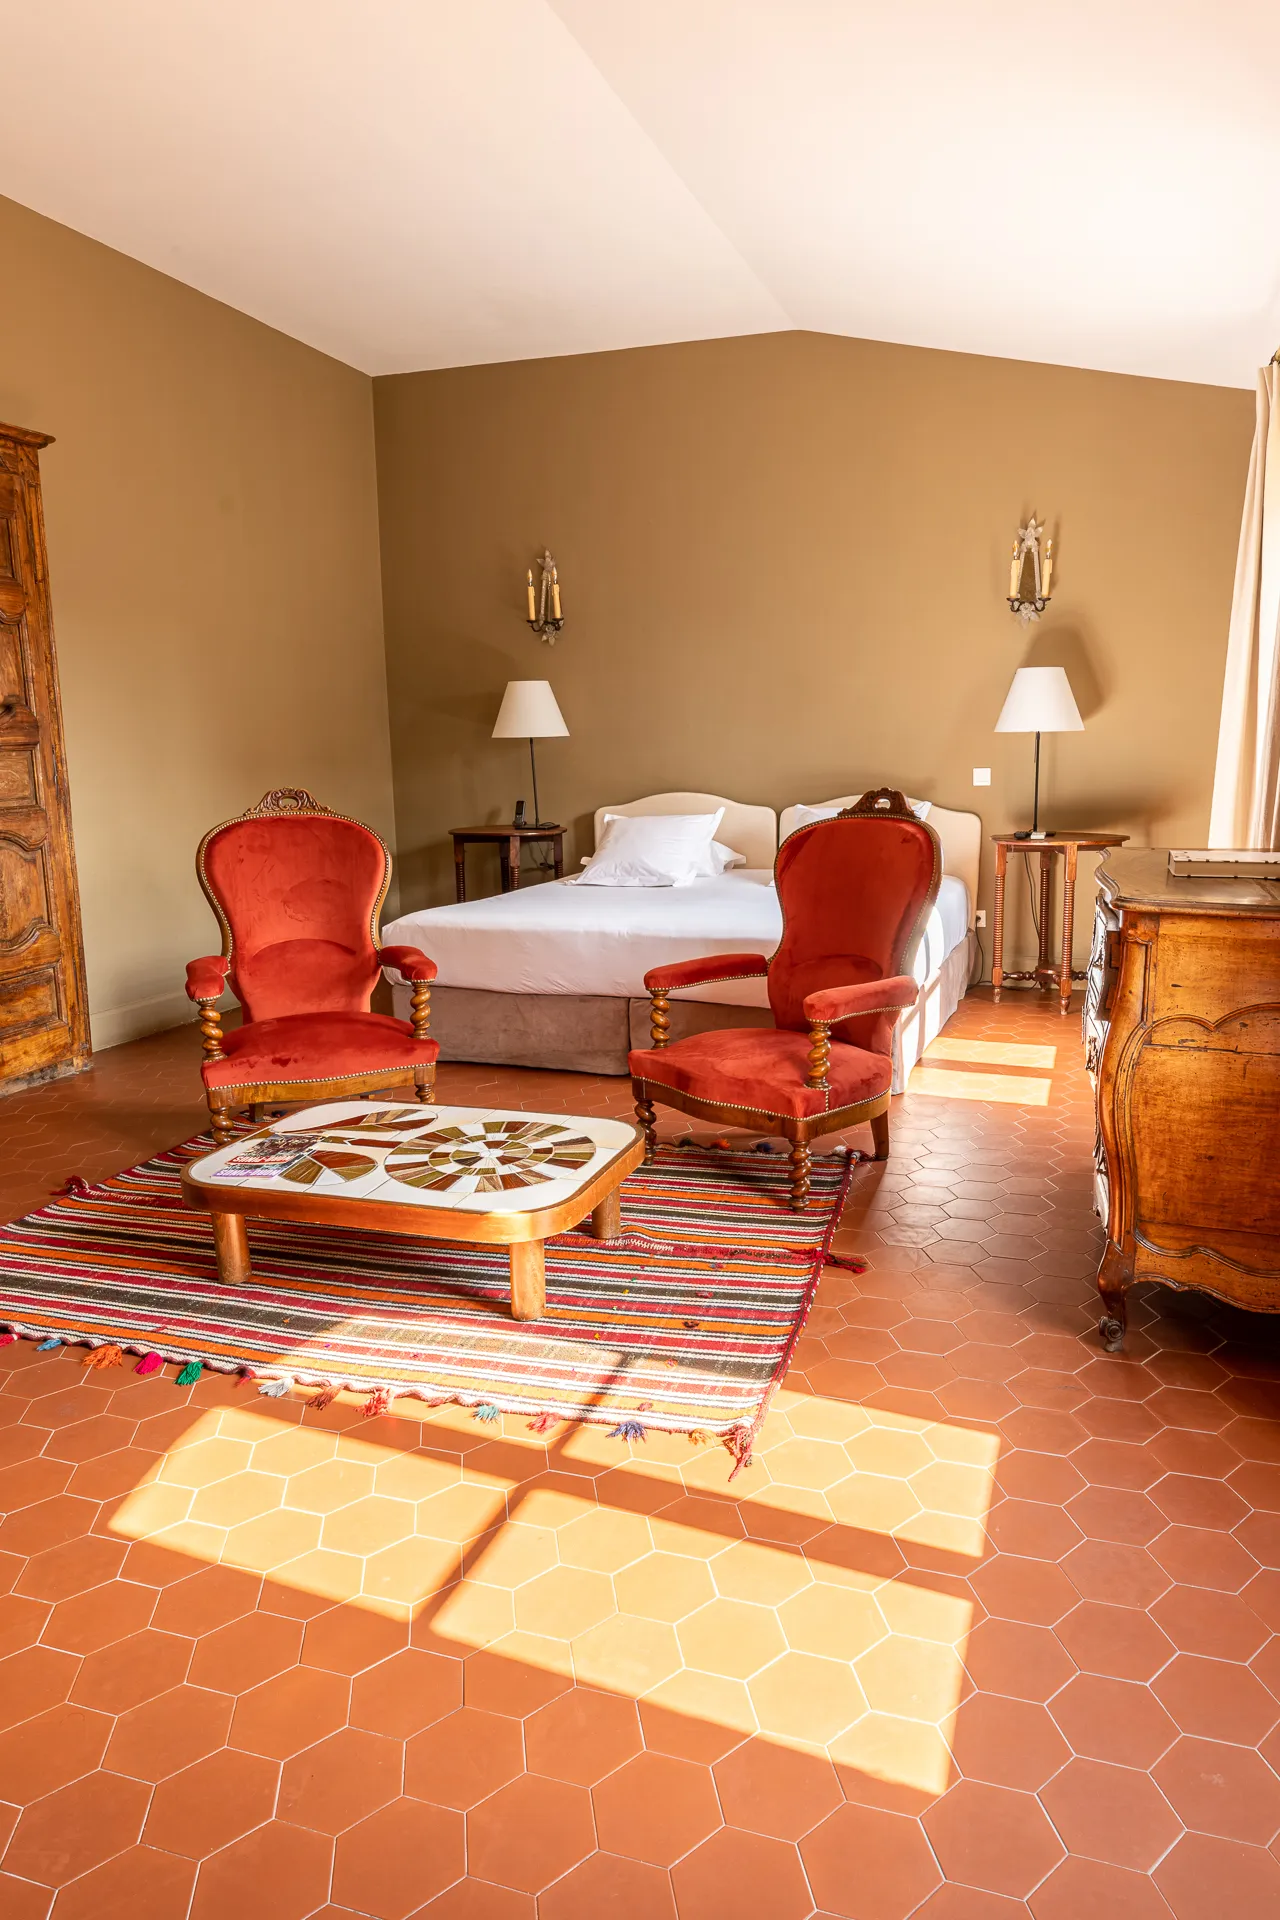 Room at hotel Le Nord-Pinus. On the right, a ray of sunlight streams through the window. The floor is covered with tomettes. In the center of the picture, there are two red Napoleon III armchairs, a coffee table and a bed behind.